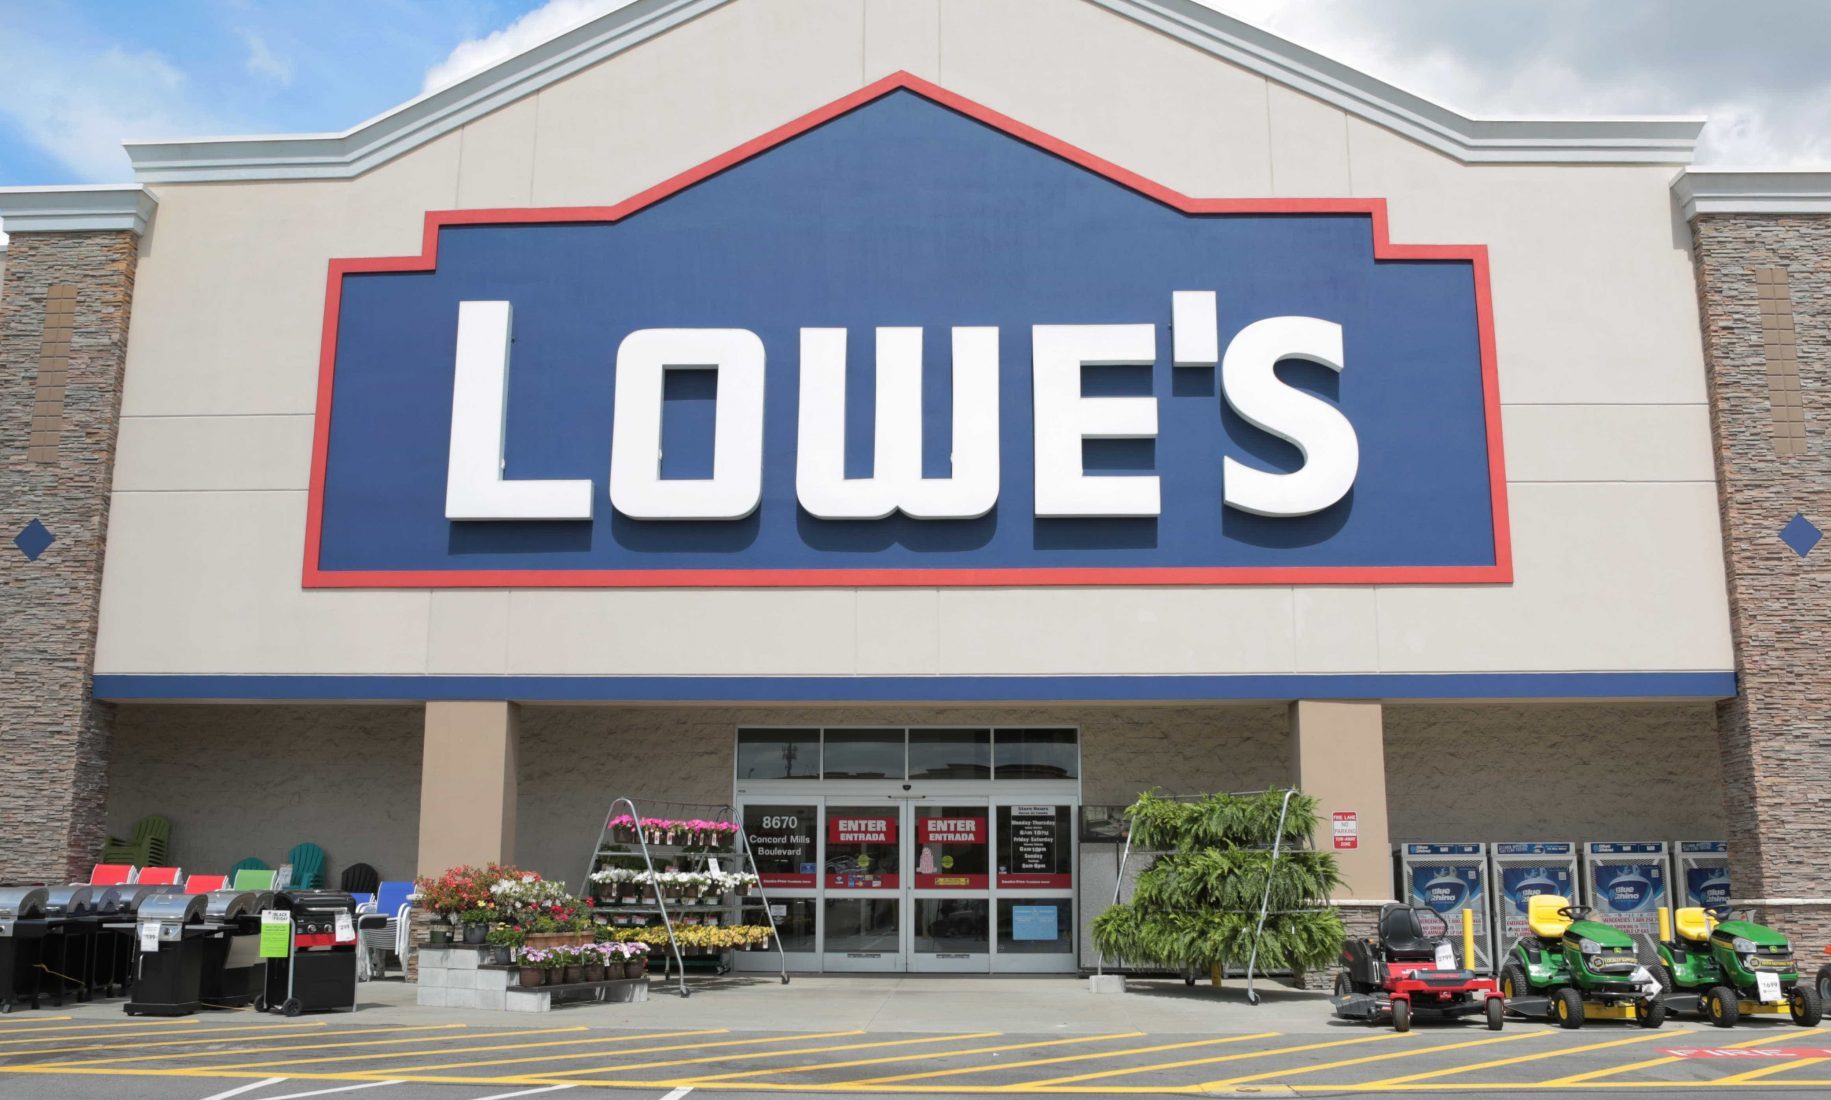 lowes at the mills